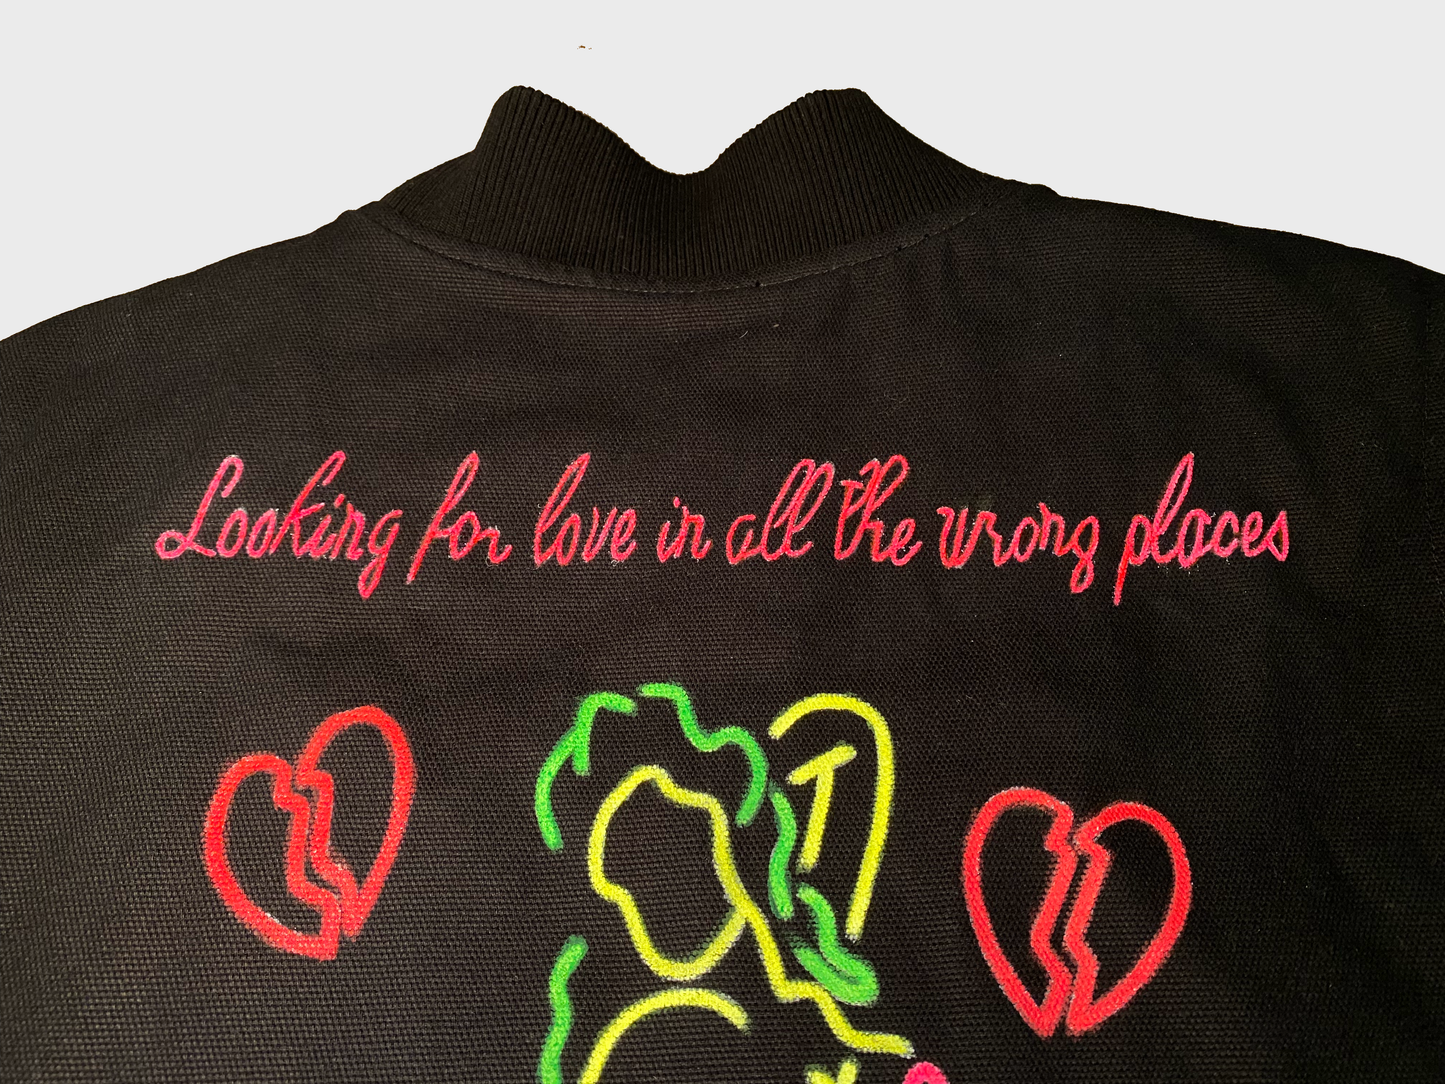 Looking for love in all the wrong places Vest